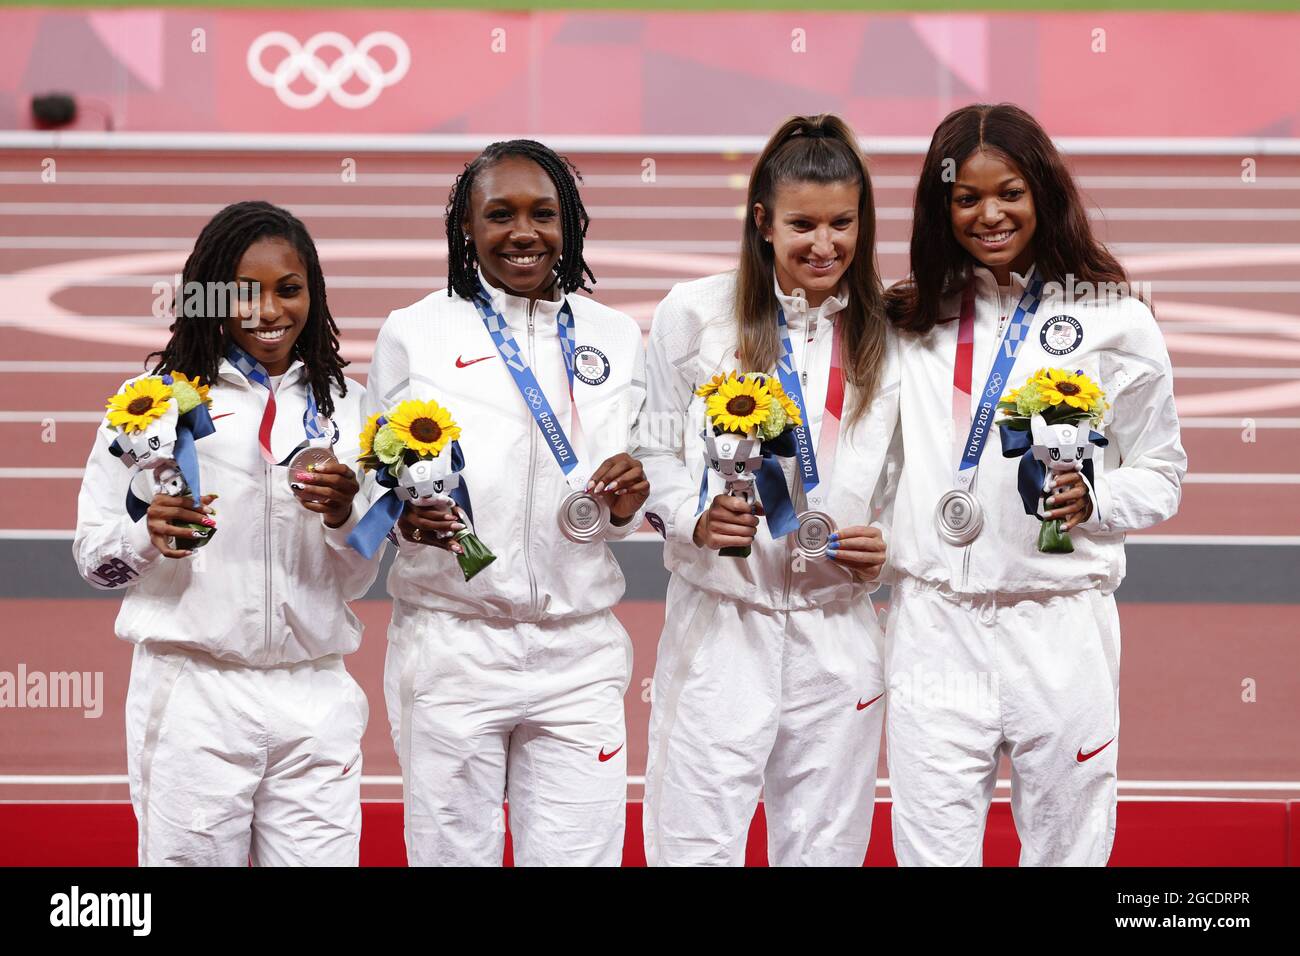 USA 2nd Silver Medal during the Olympic Games Tokyo 2020, Athletics Womens 4x100m Relay Medal Ceremony on August 7, 2021 at Olympic Stadium in Tokyo, Japan - Photo Yuya Nagase / Photo Kishimoto / DPPI Stock Photo